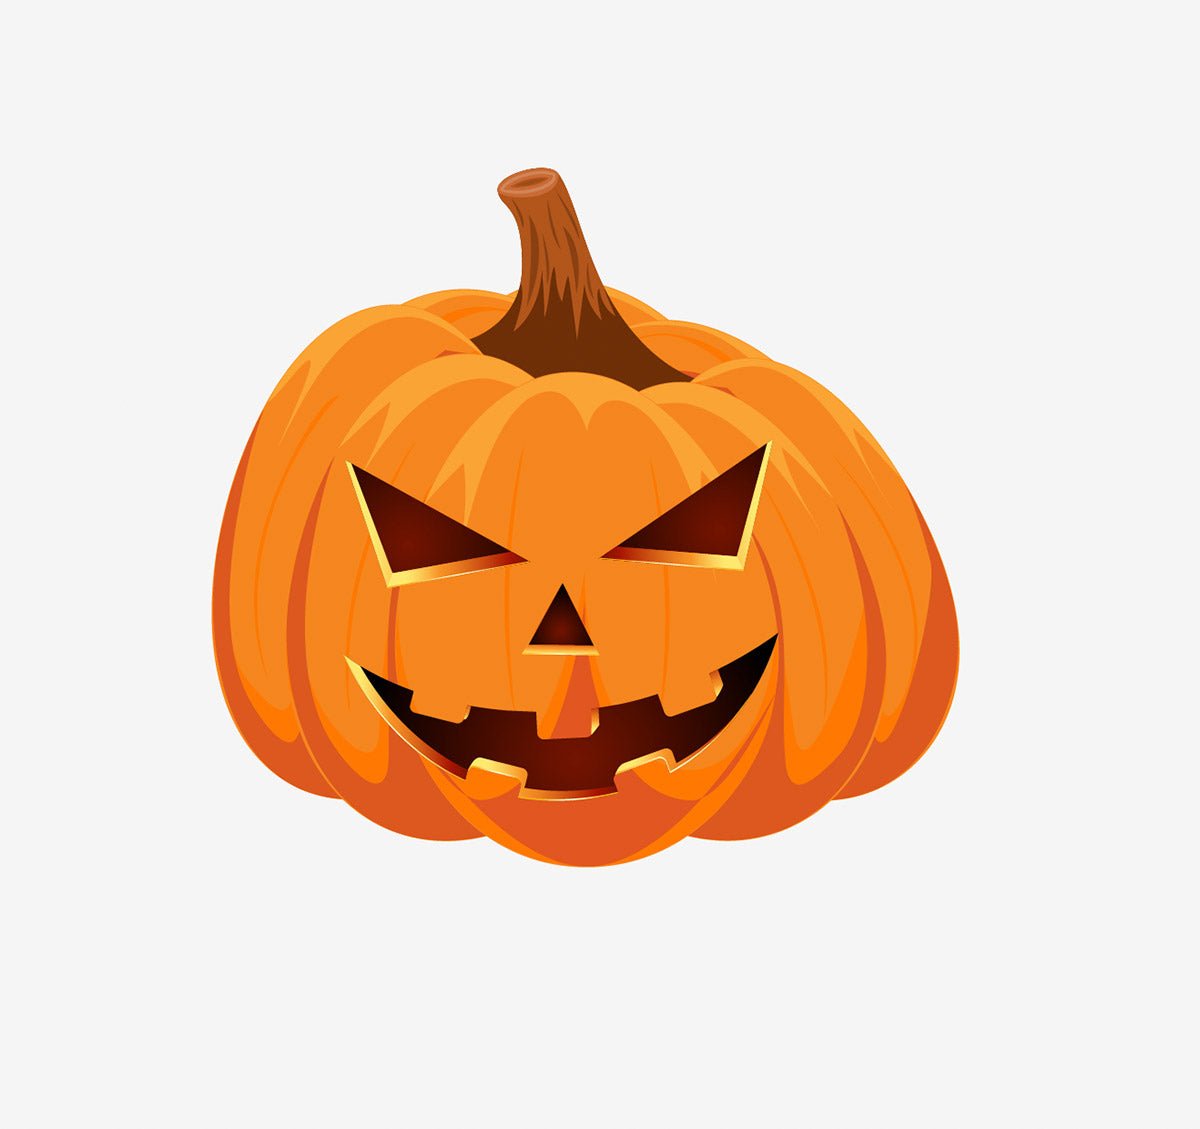 Carved Jack O' Lantern Pumpkin Decals with a menacing face, featuring triangular eyes and a jagged smile, set against a plain background as one of the classic Halloween decorations. Made by Cover-Alls.